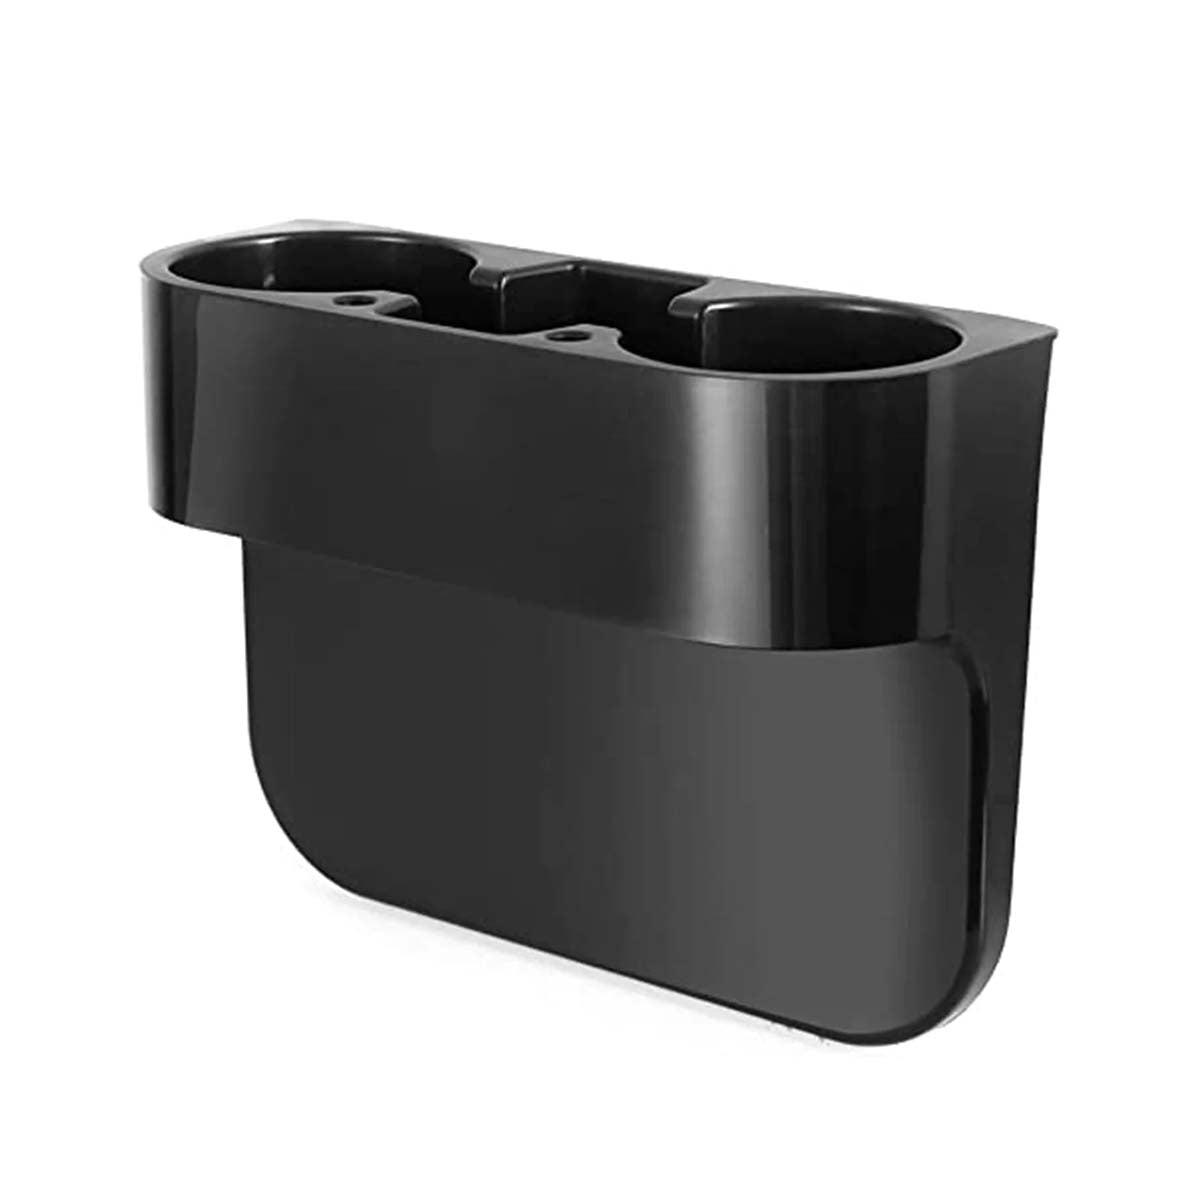 Cup Holder Portable Multifunction Vehicle Seat Cup Cell Phone Drinks Holder Box Car Interior Organizer, Custom Logo For Your Cars, Car Accessories LI11995